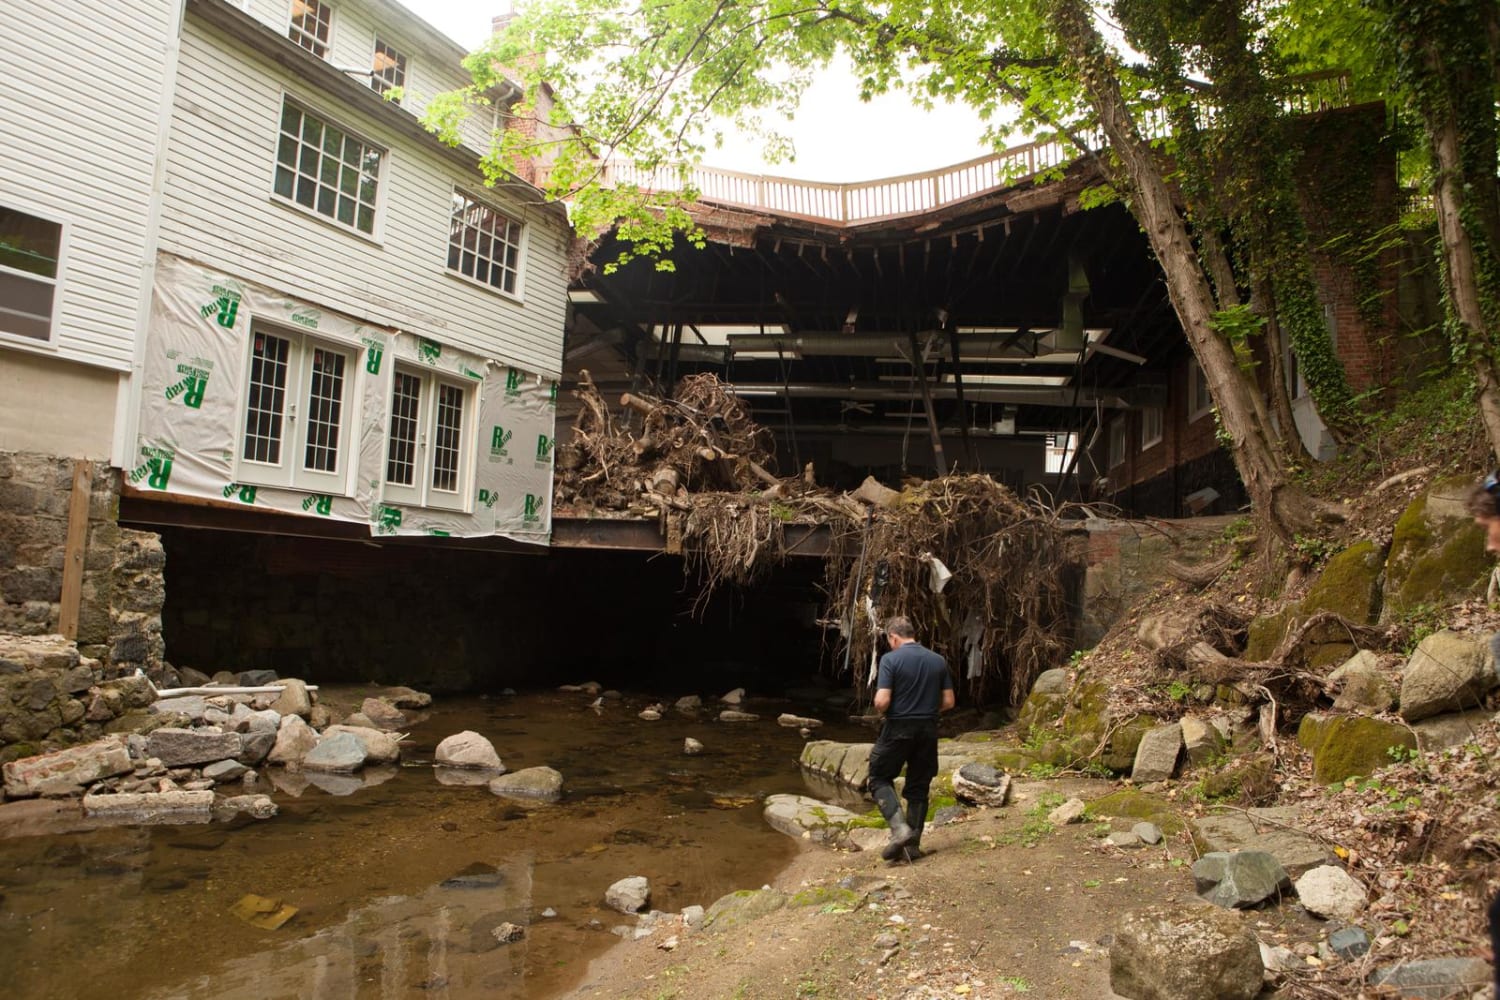 After The Water: Flash Floods Pose Existential Threat To Towns Across U.S.